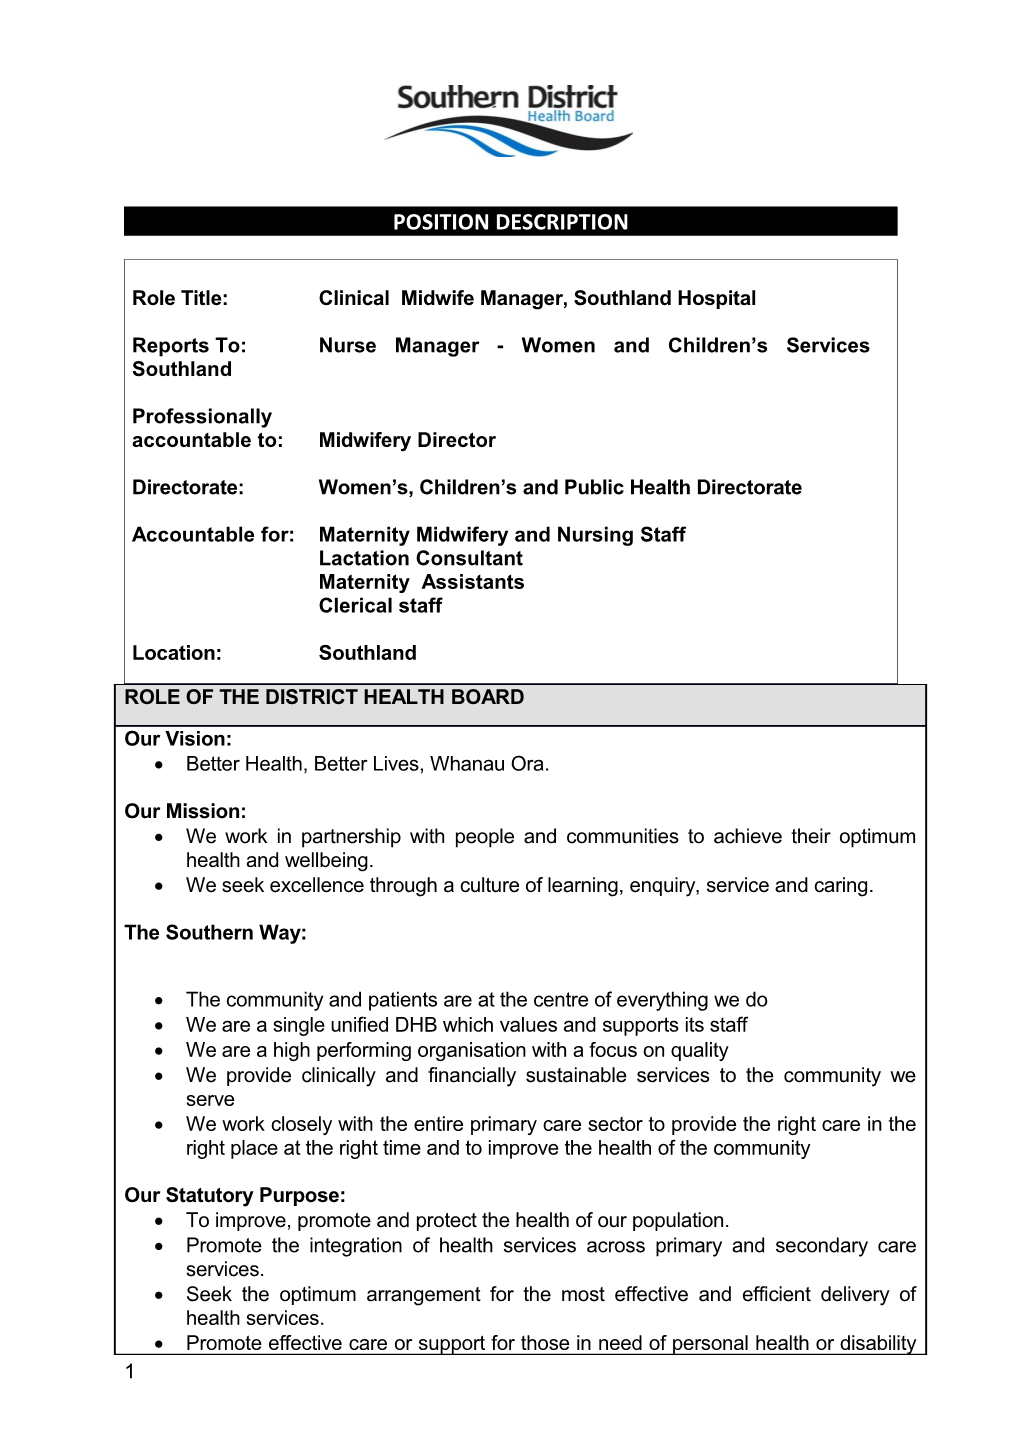 Role Title: Clinical Midwife Manager, Southland Hospital